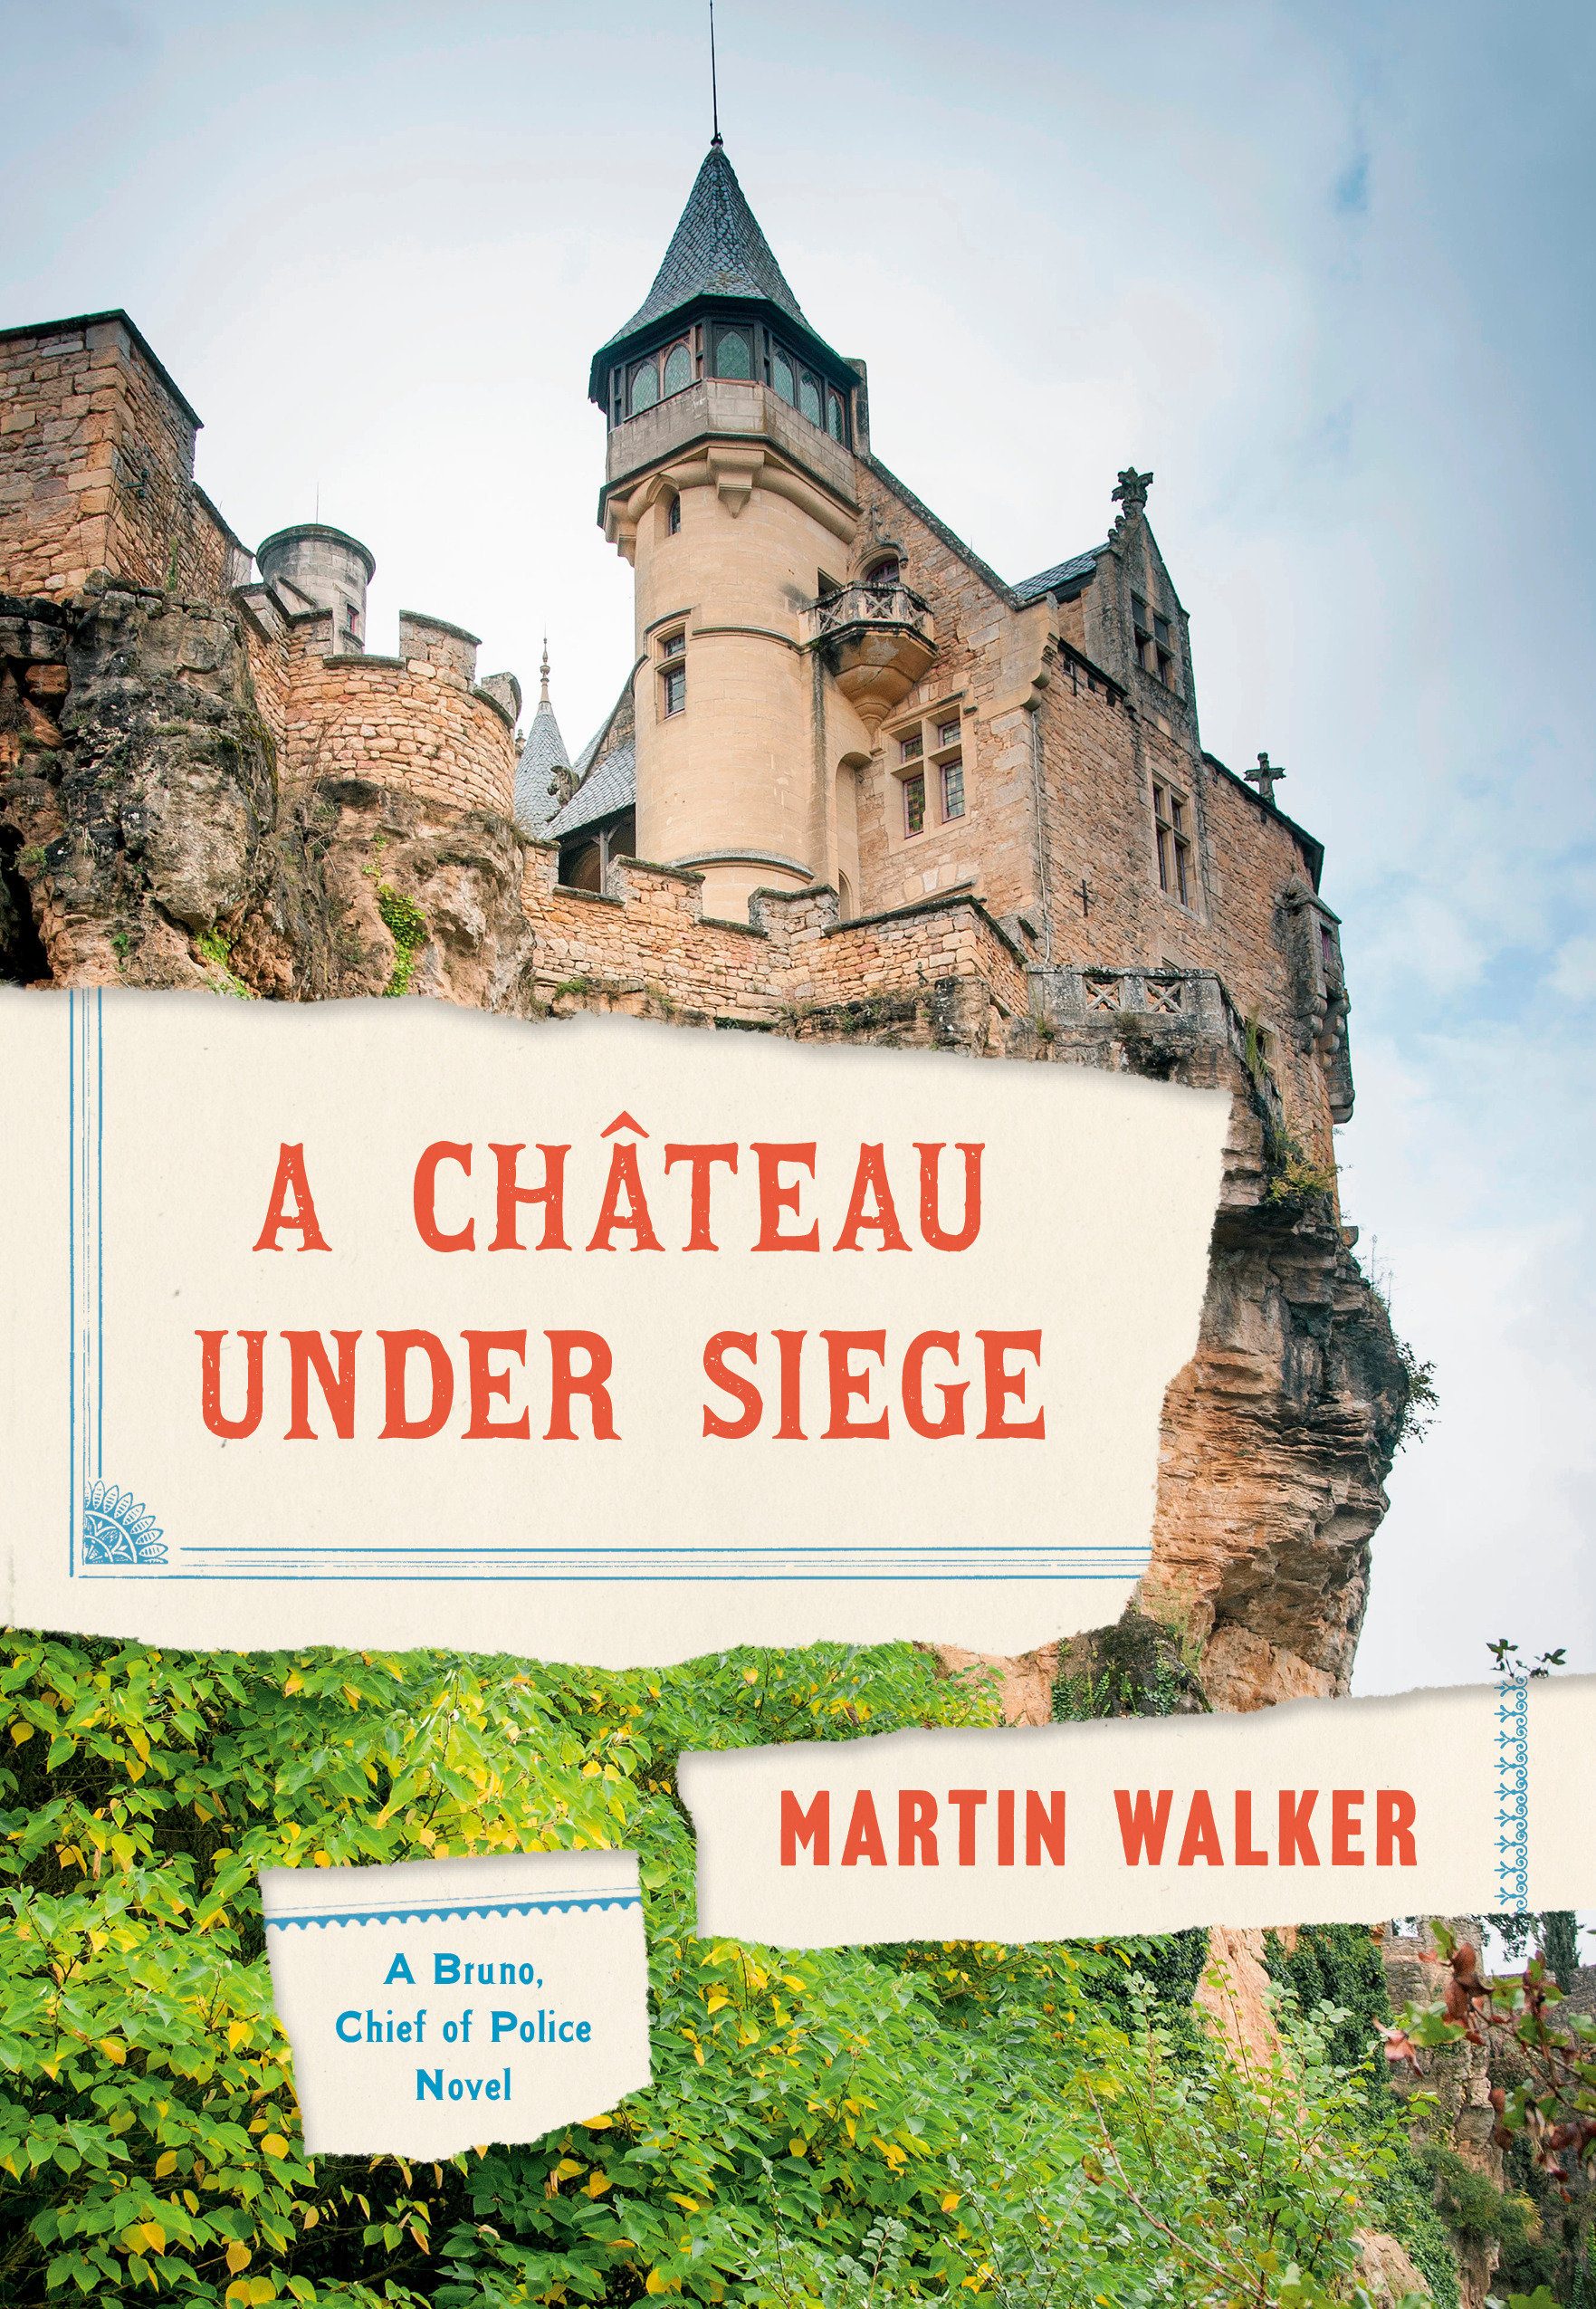 A Chateau Under Siege (Hardcover Book)